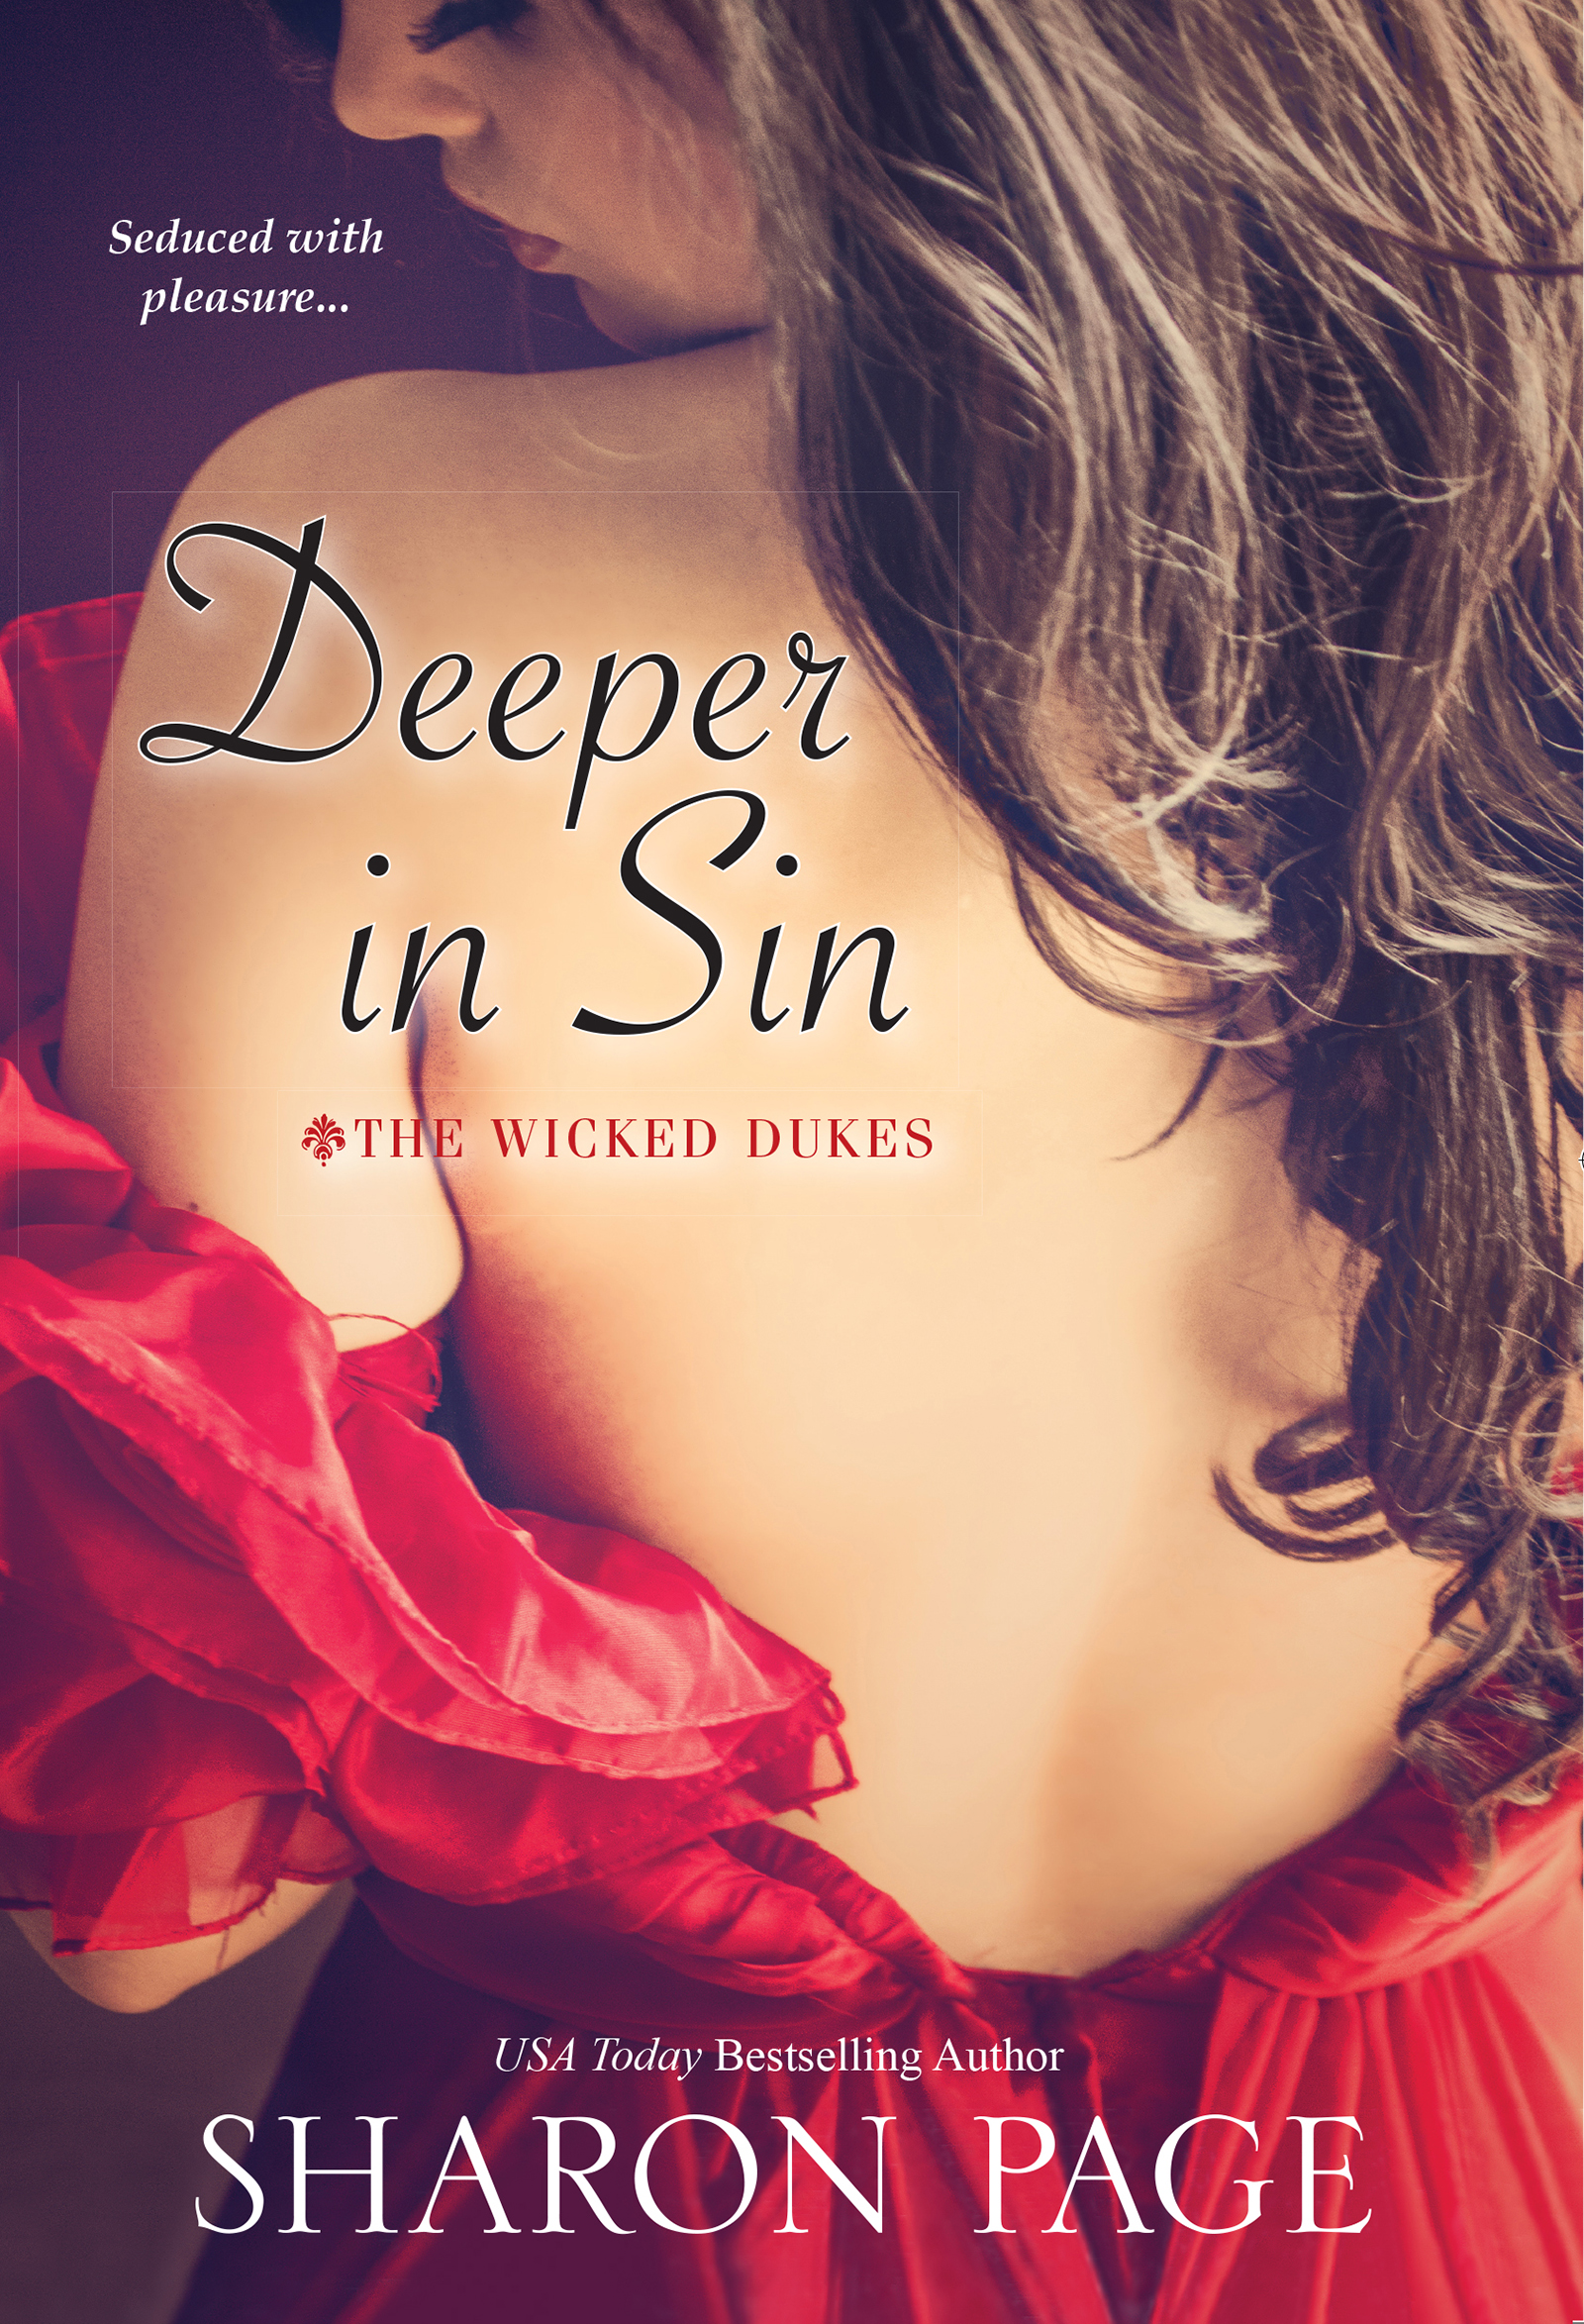 Deeper in sin cover image